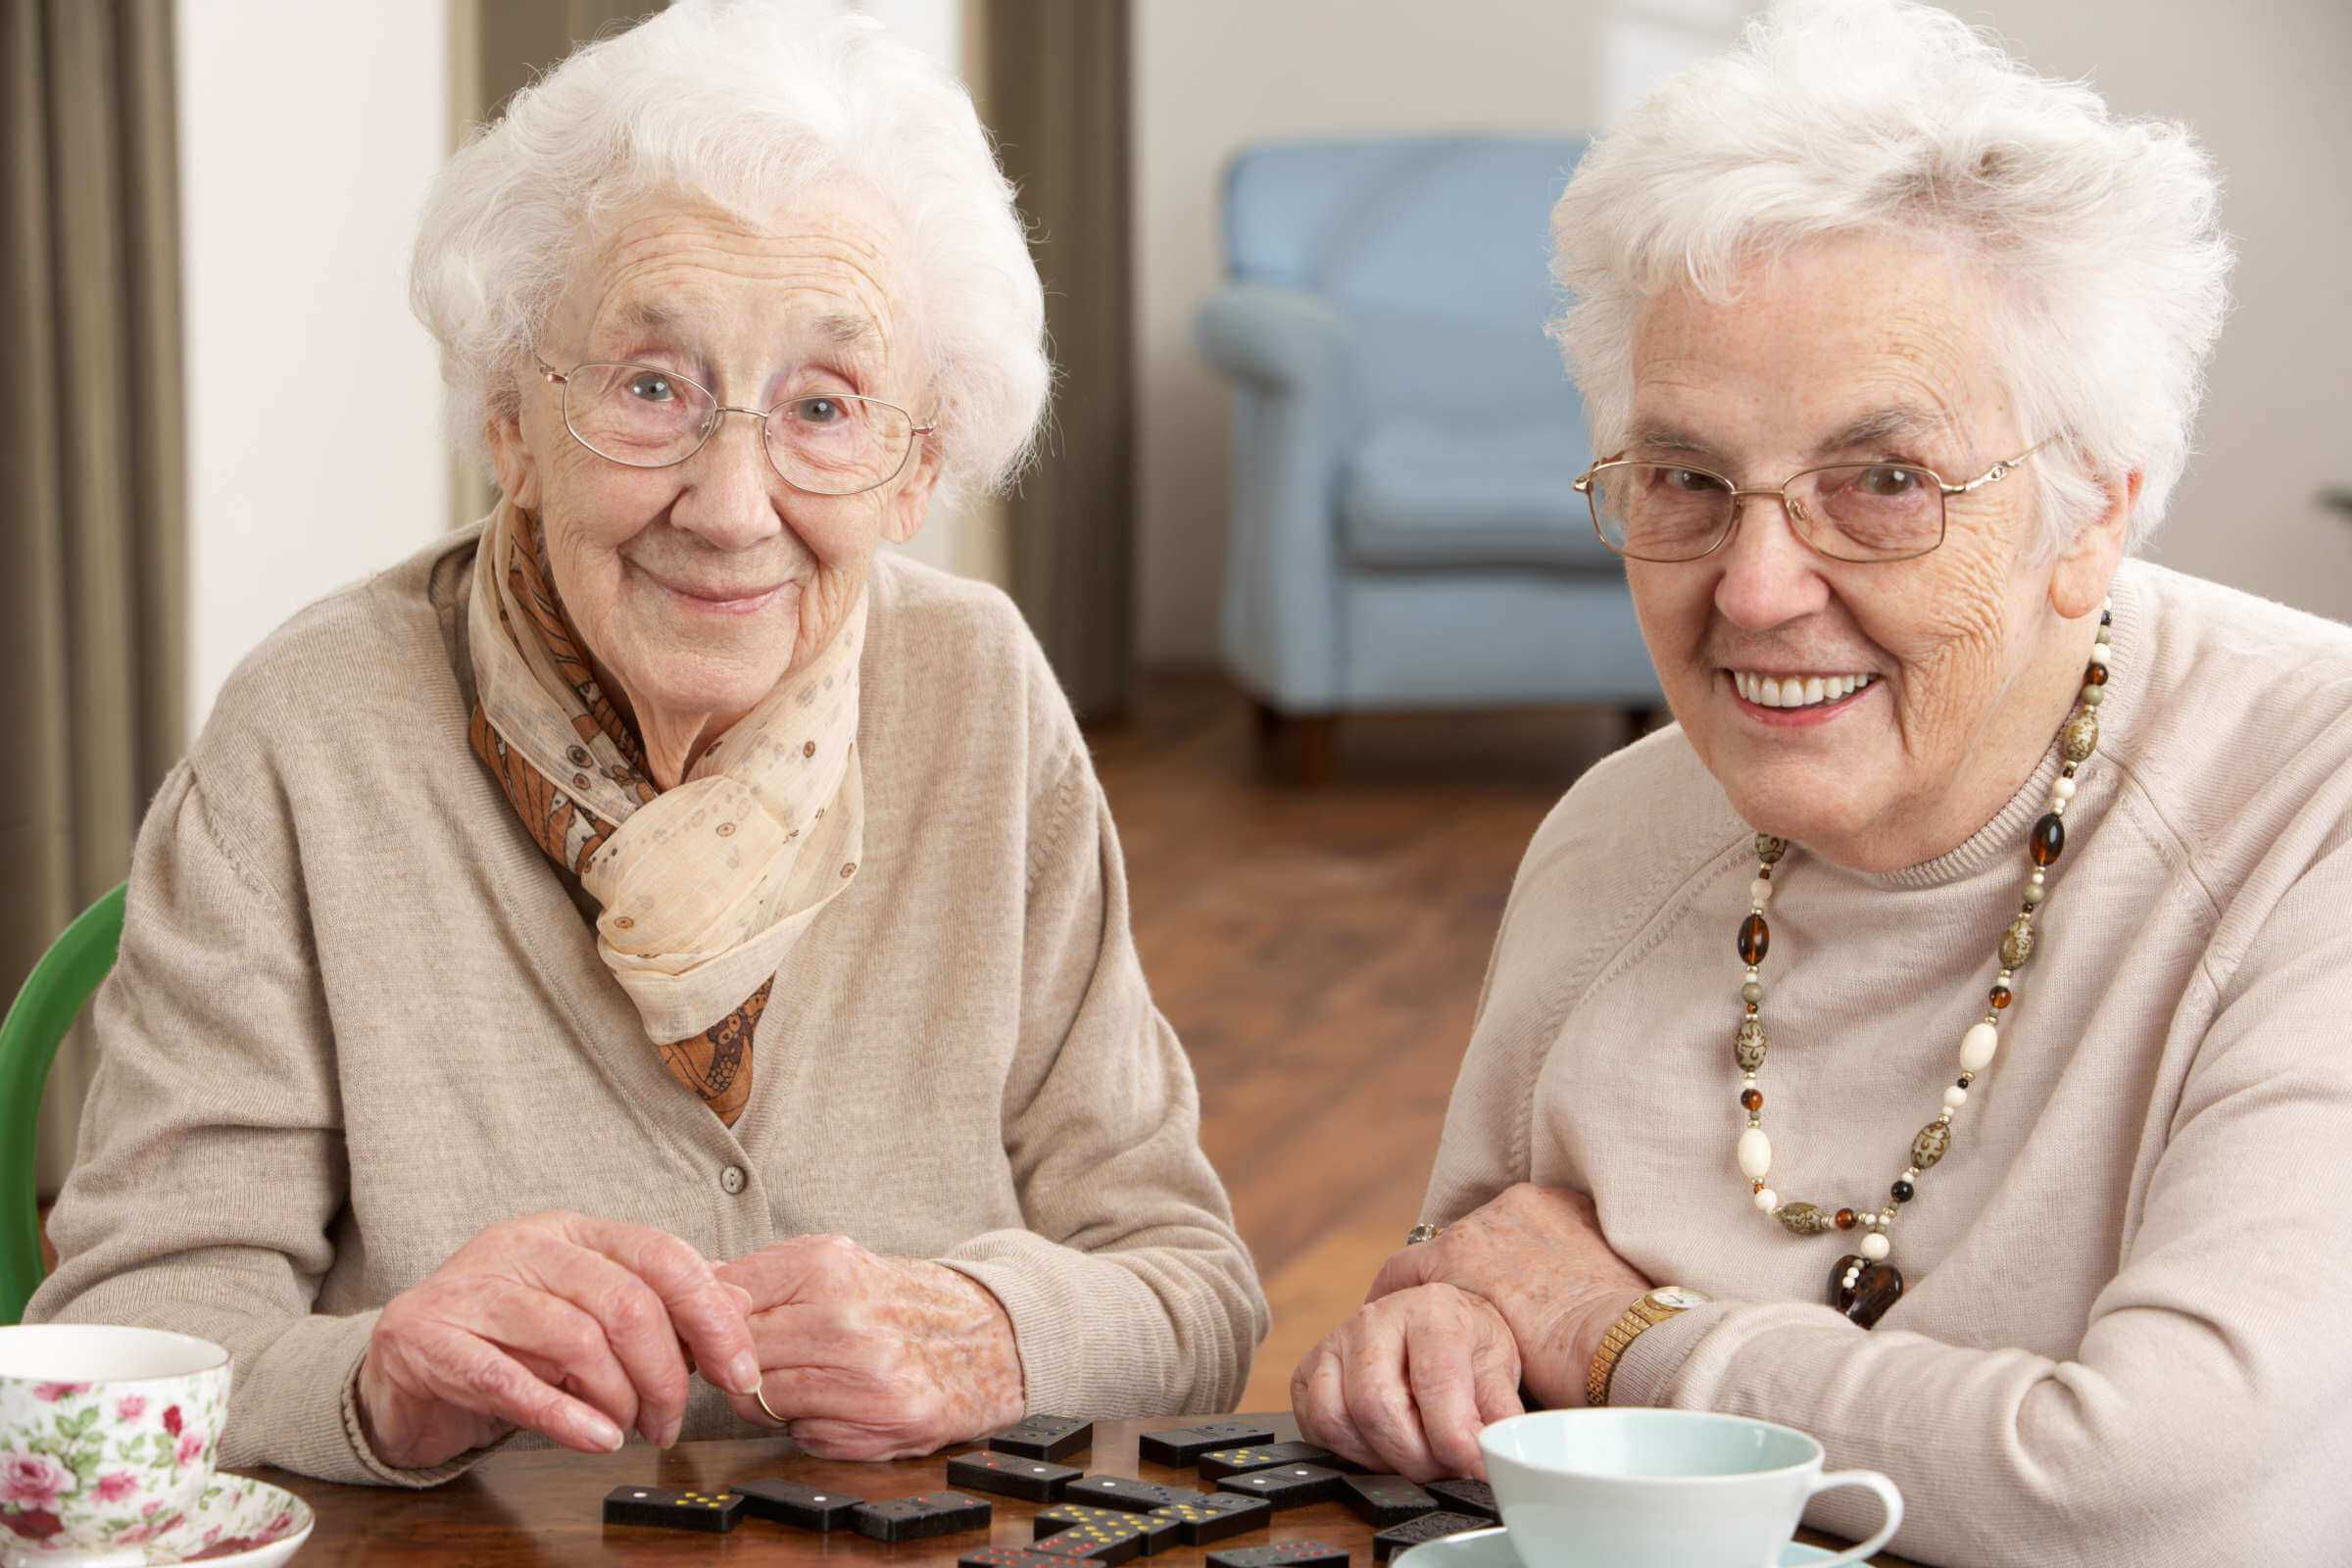 Two smiling senior women in aged care